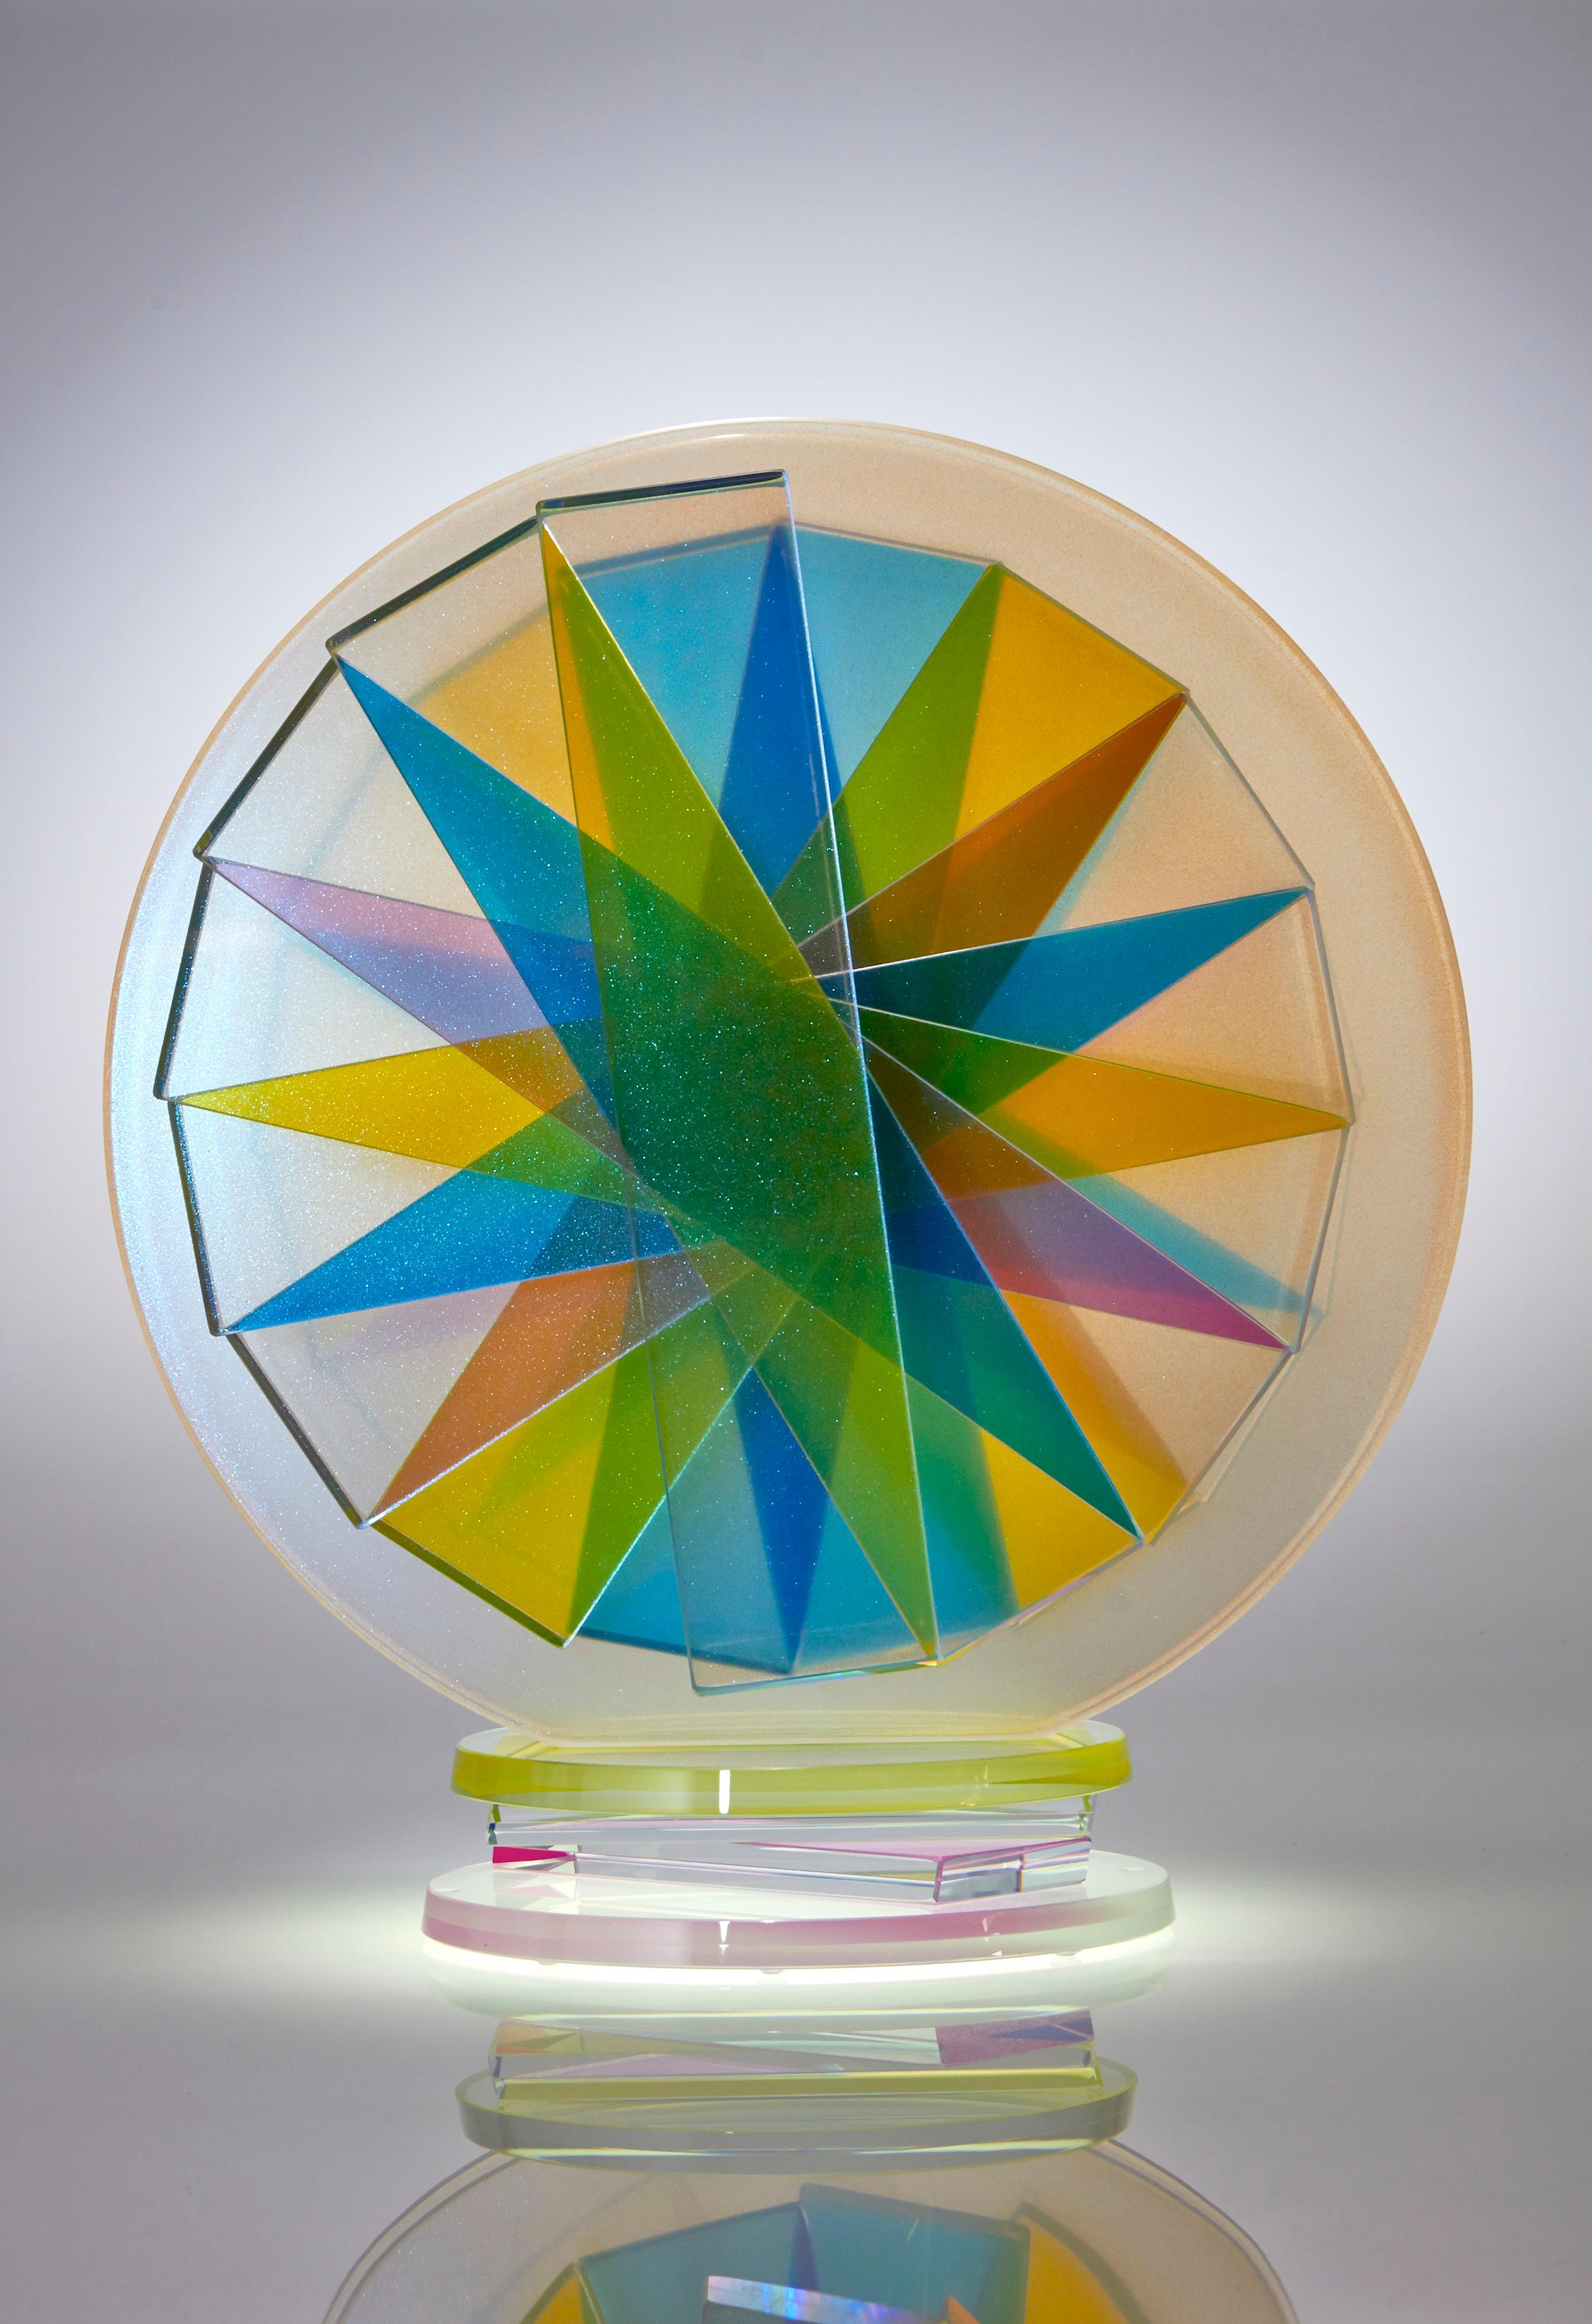 Contemporary Colorful Plate Glass Tabletop Sculpture (amerikanisch) im Angebot